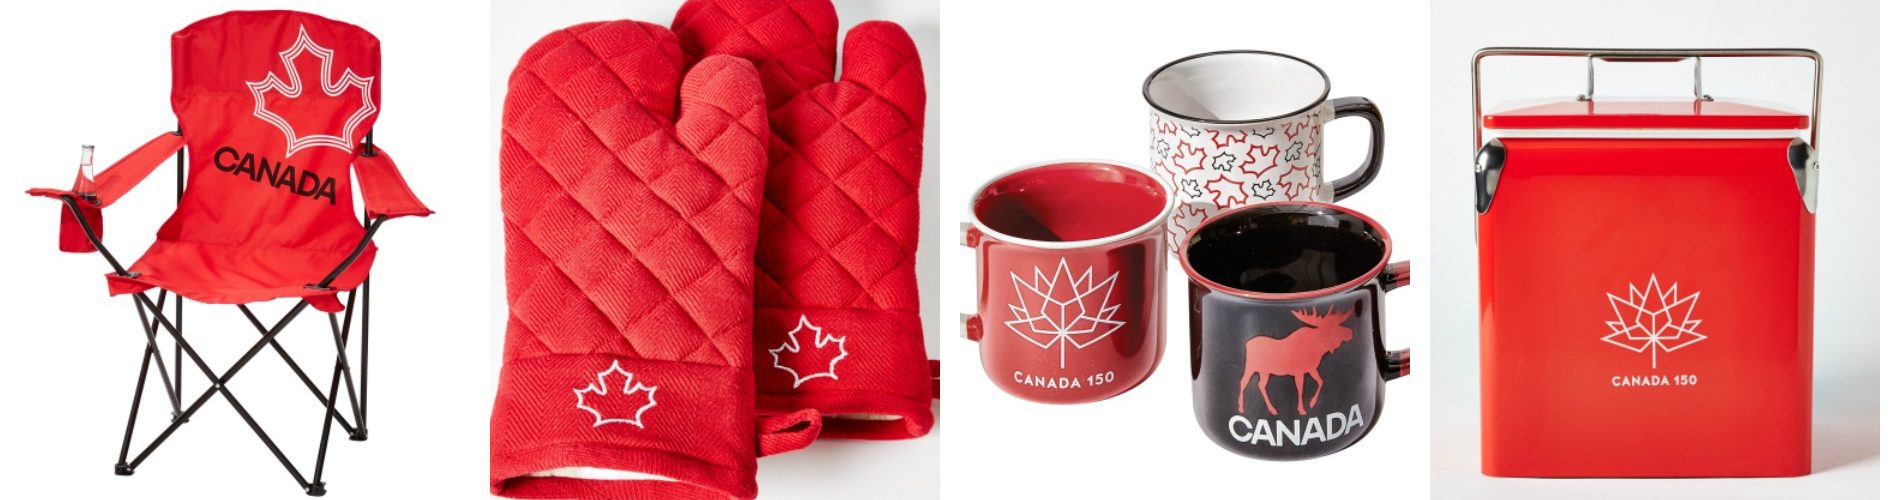 Canada 150: Sears Canada D'eh Price Pack